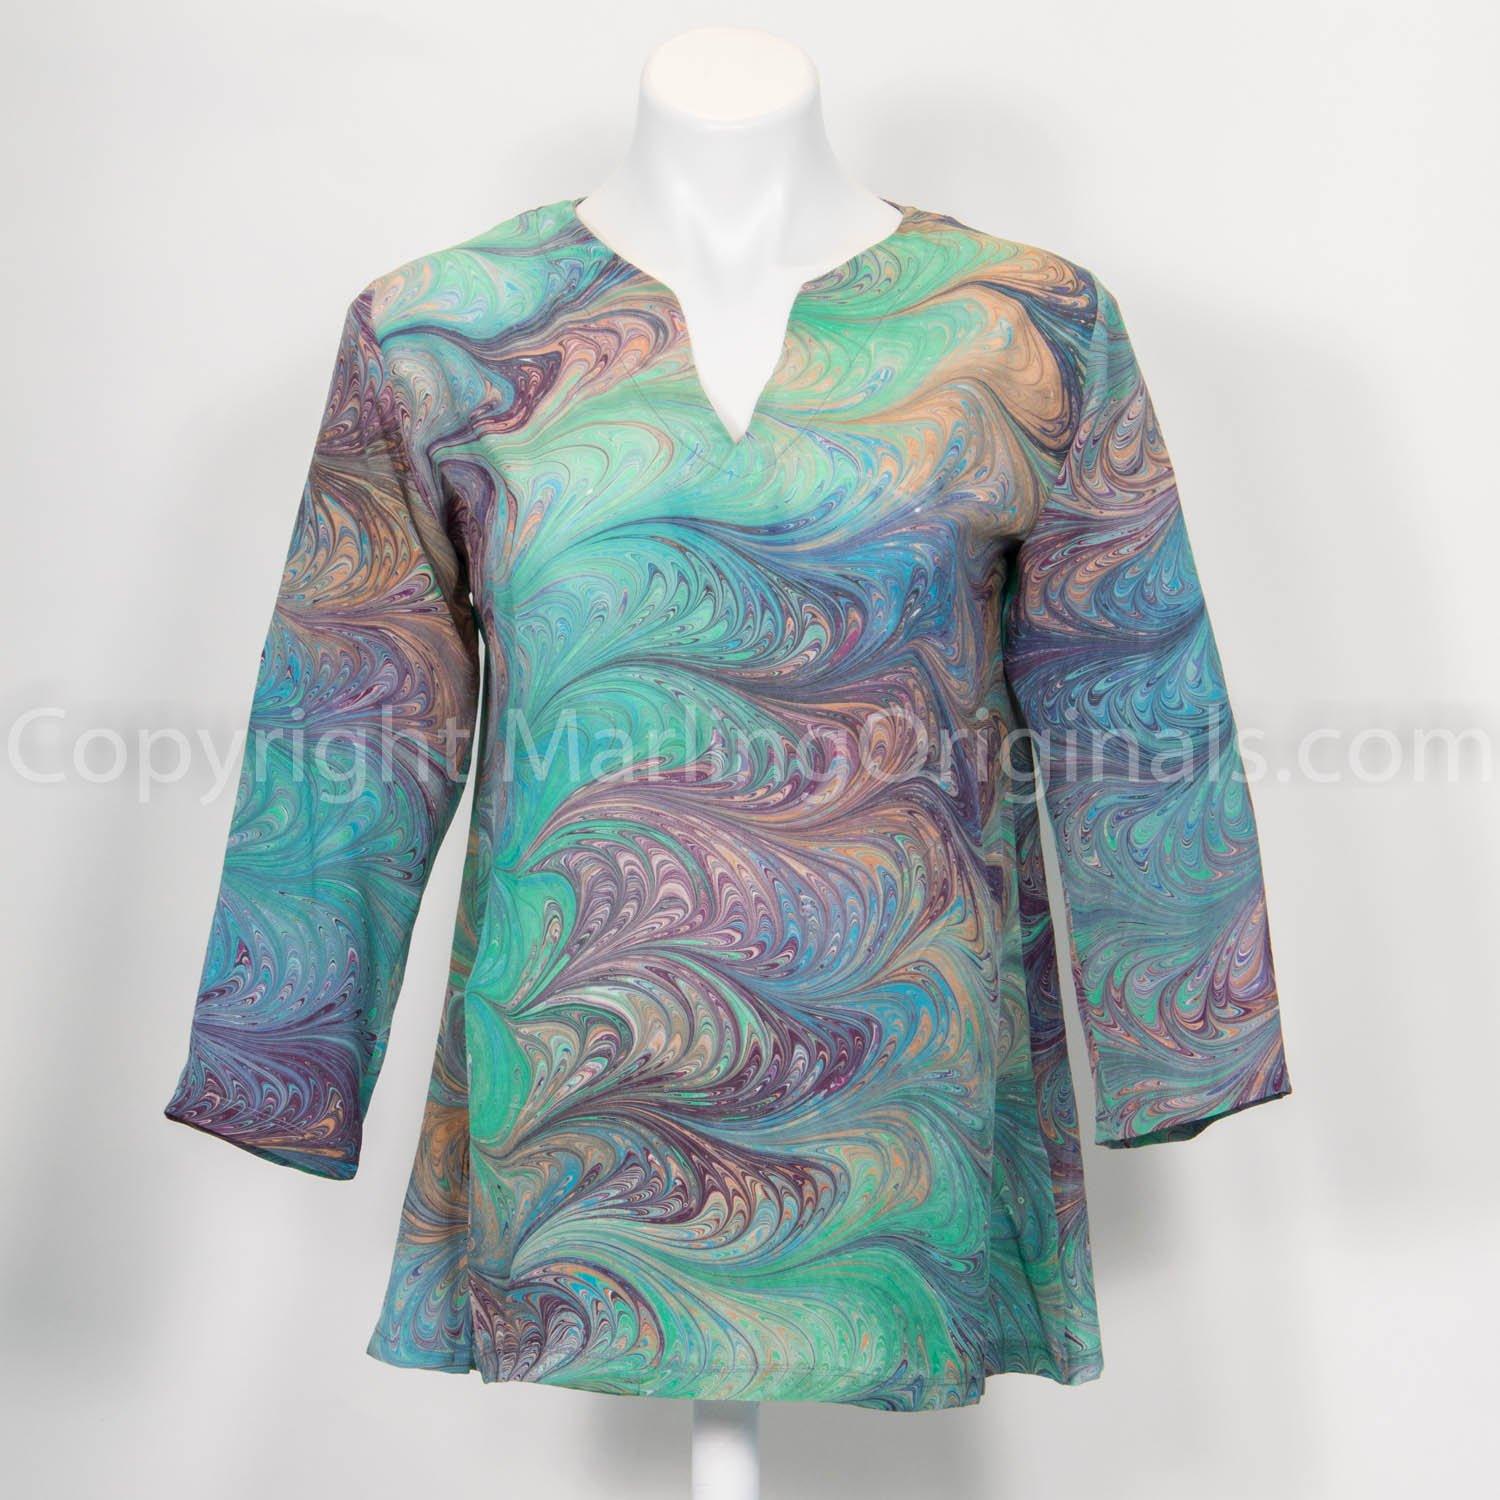 marbled silk tunic with notched neck, side vents, 3/4 sleeves